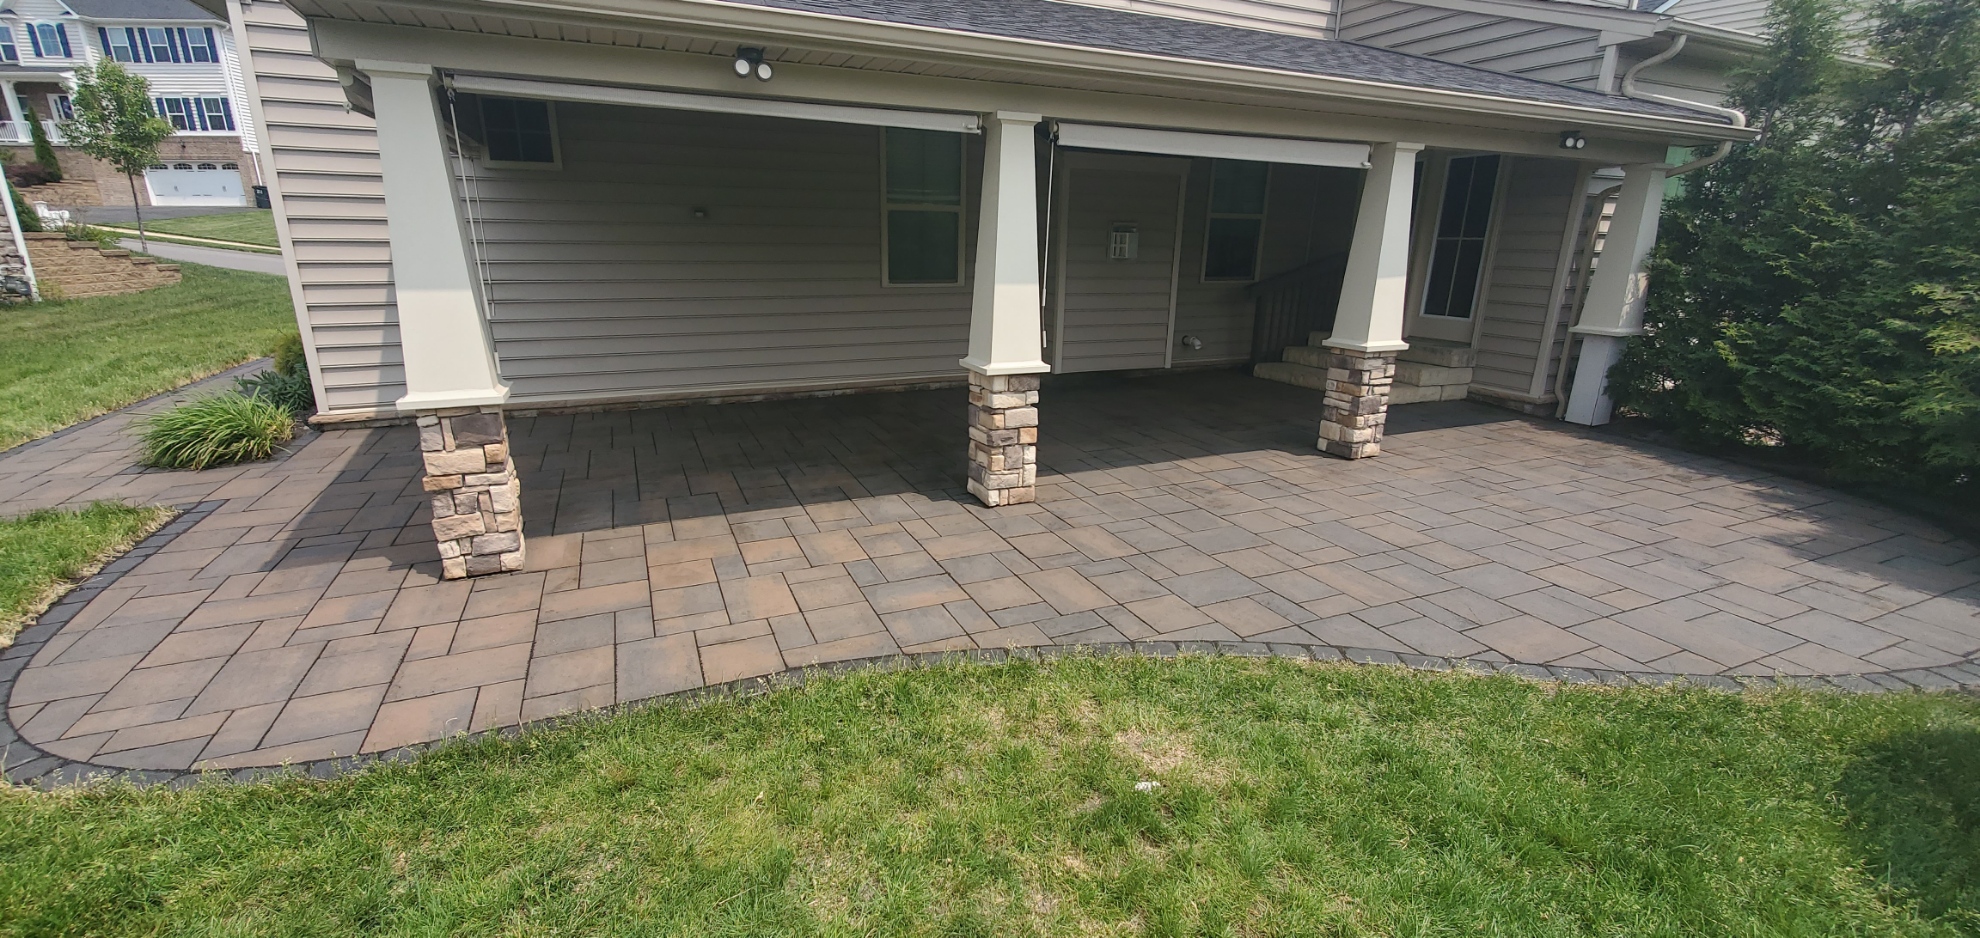 Enriched patio paver cleaning, re-sanding & sealing in Pittsburgh, Pa